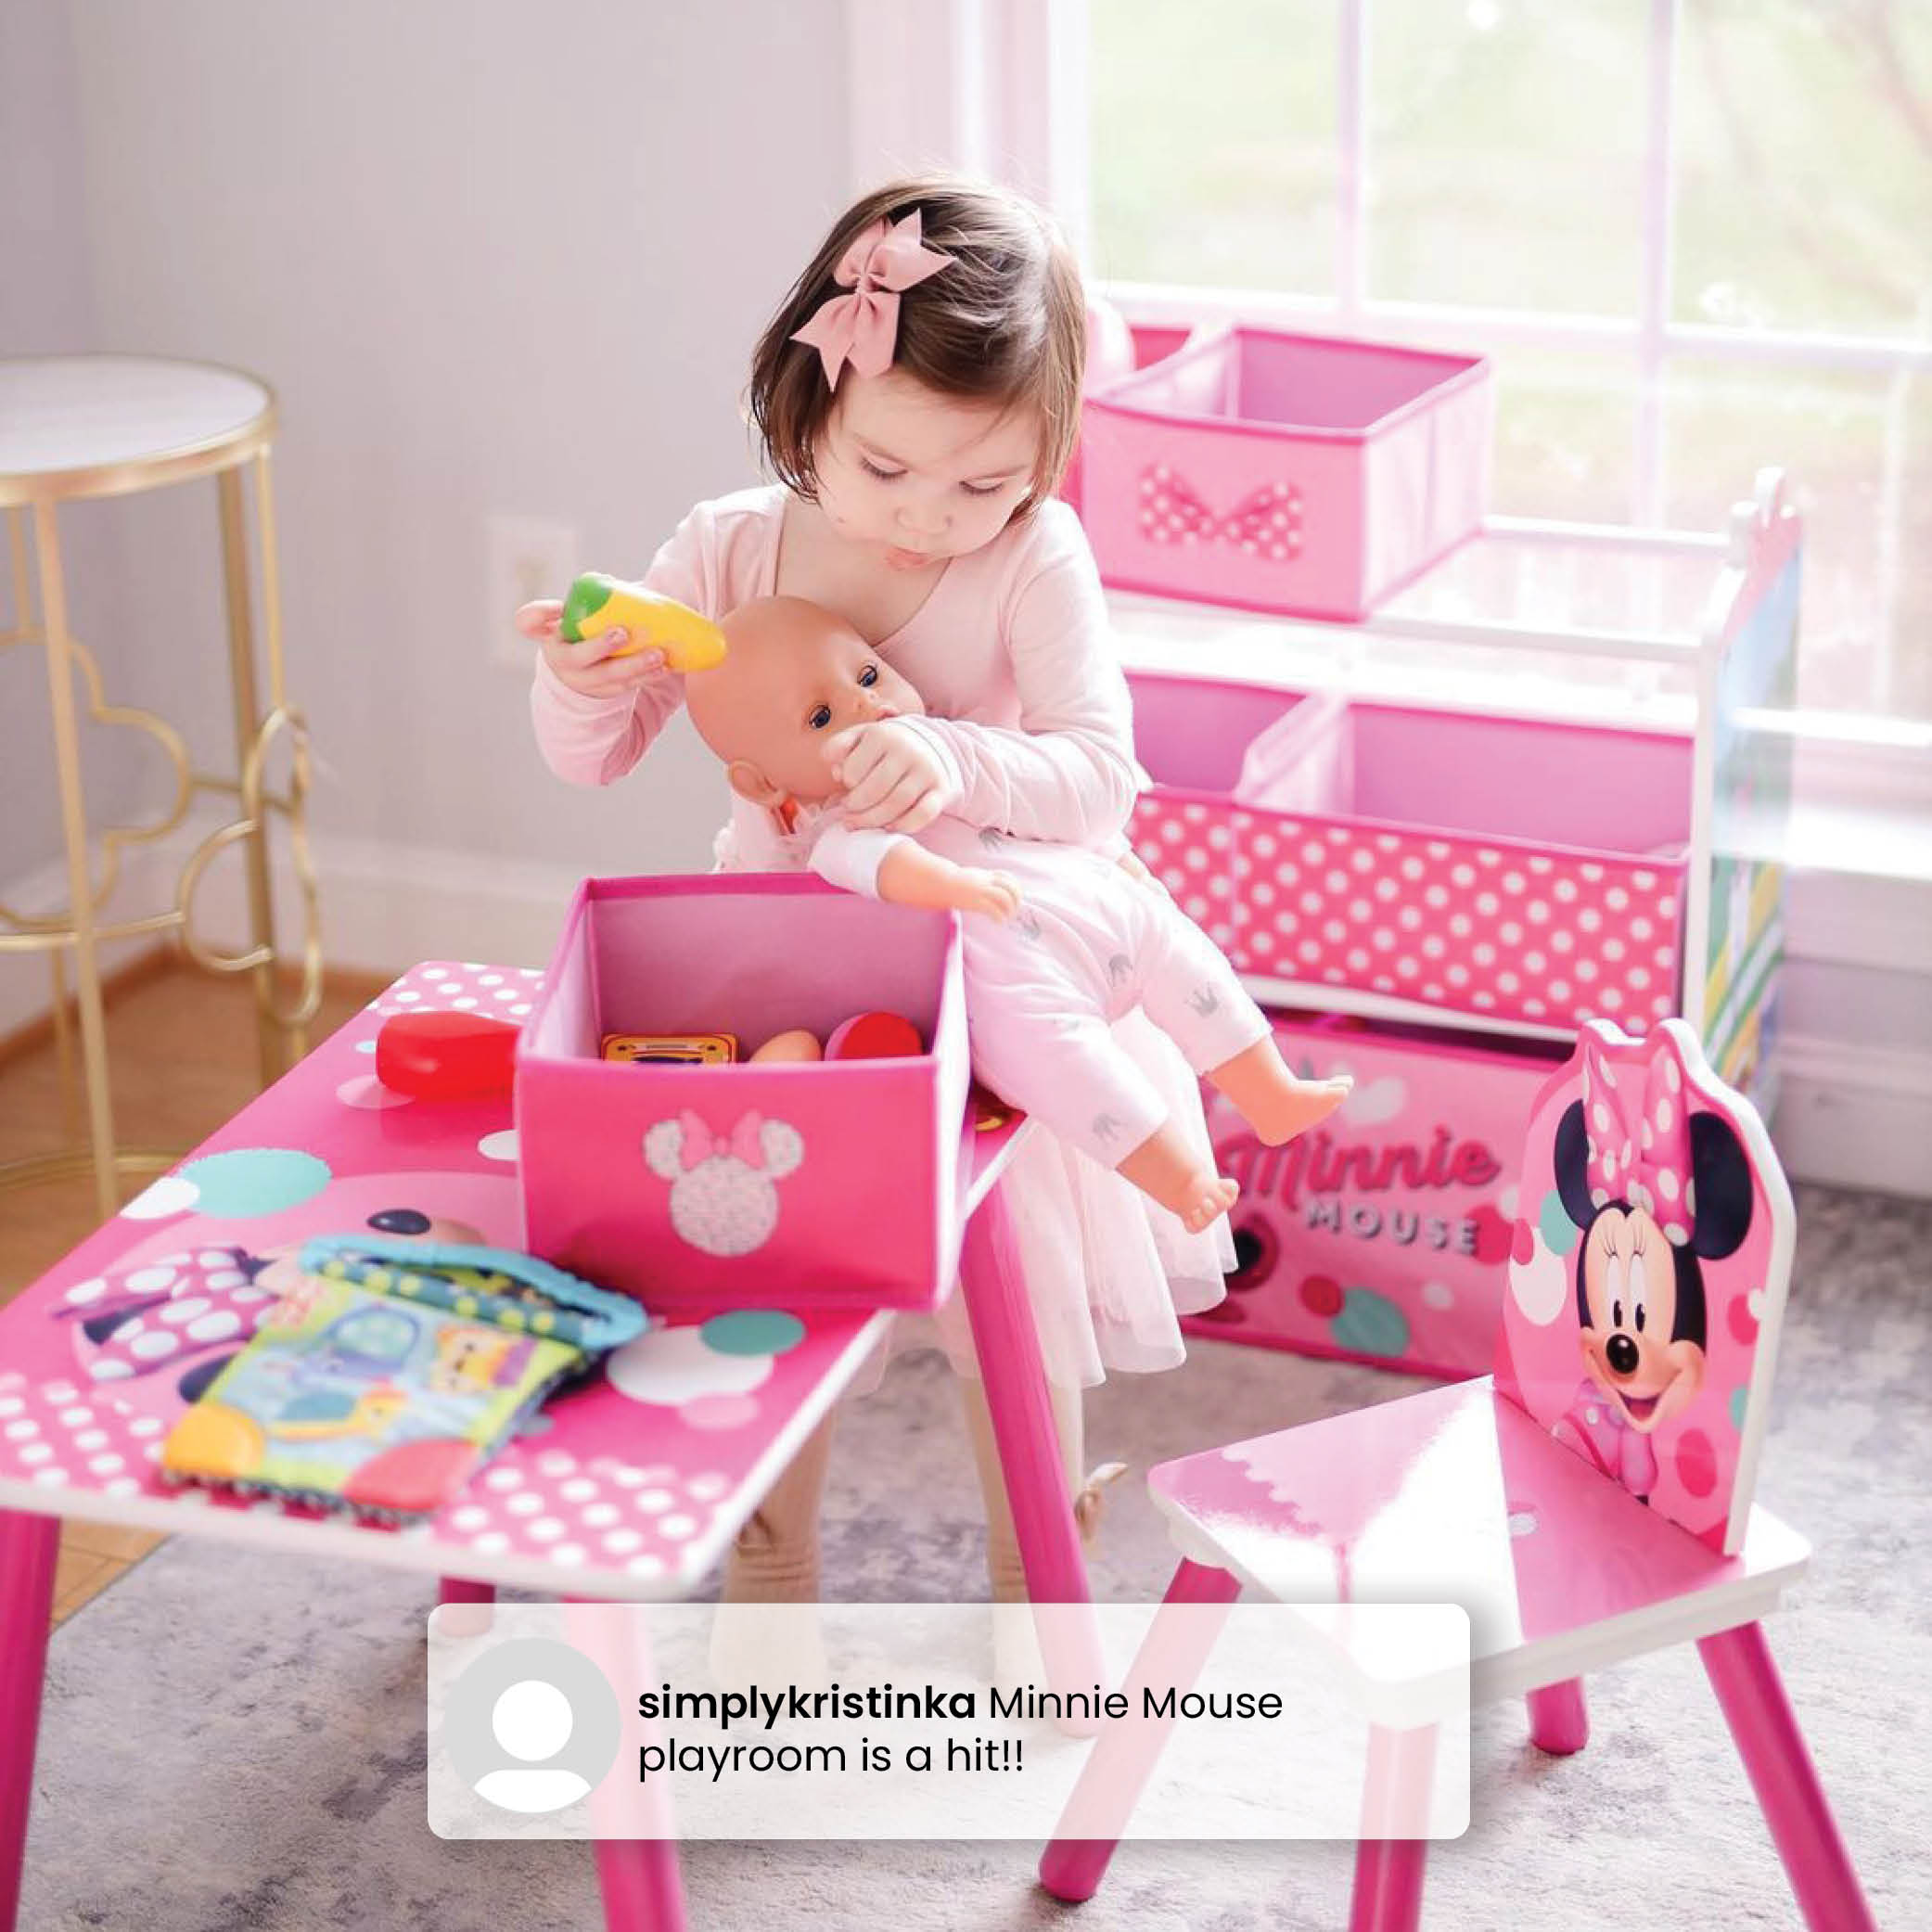 Minnie Mouse 4-Piece Wood Toddler Playroom Set – Includes Table, 2 Chairs & Toy Bin, Pink - image 13 of 13